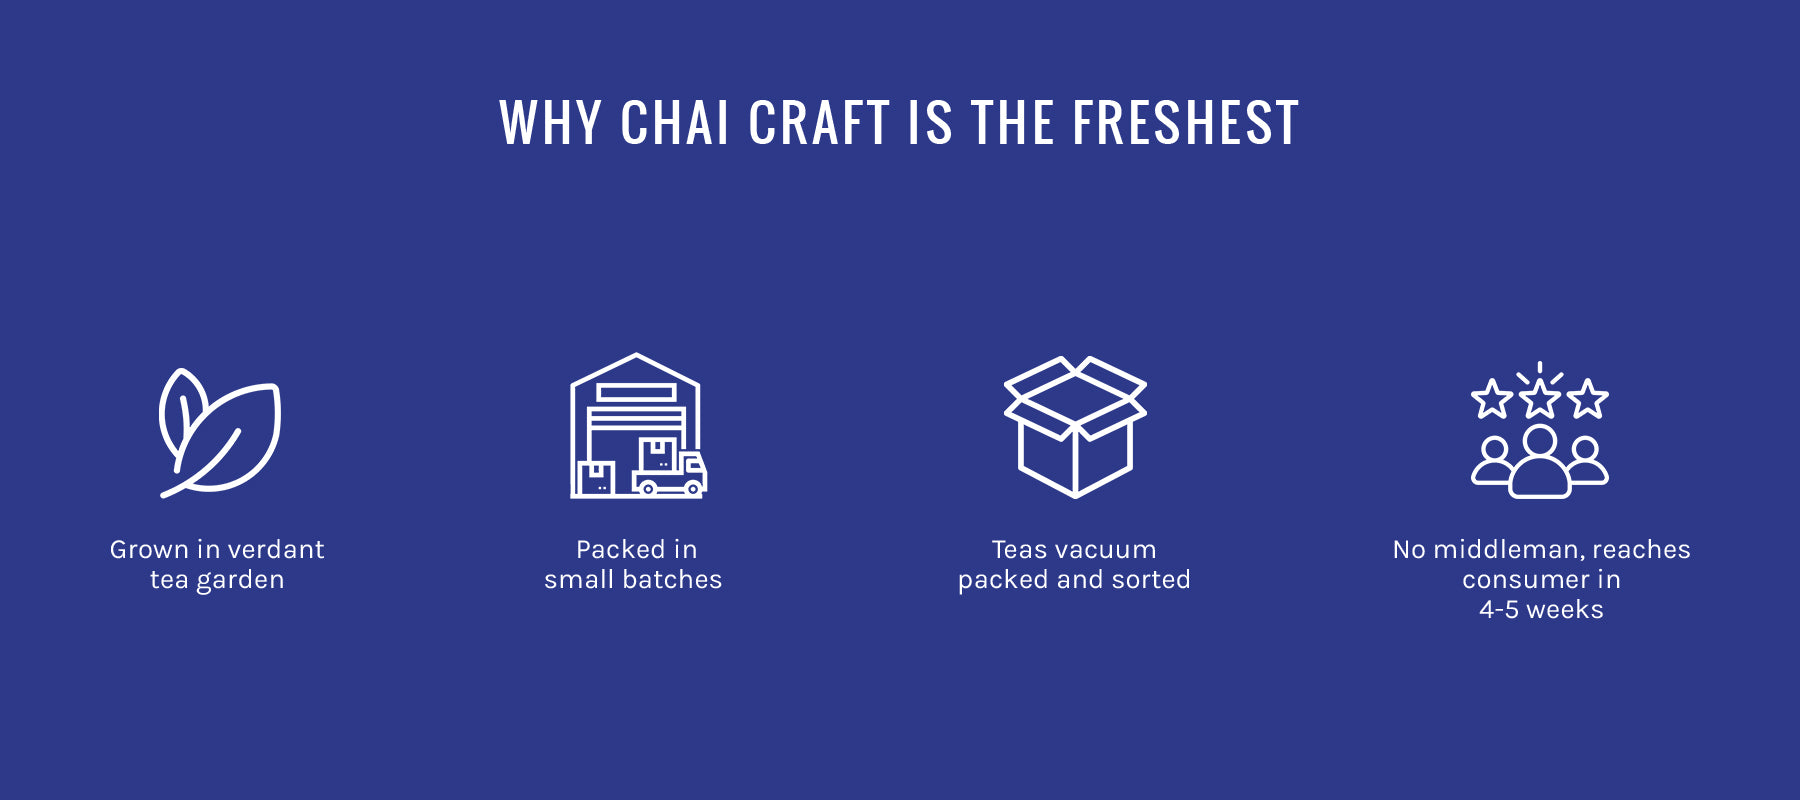 why_chaicraft_is_freshest_banner_blue